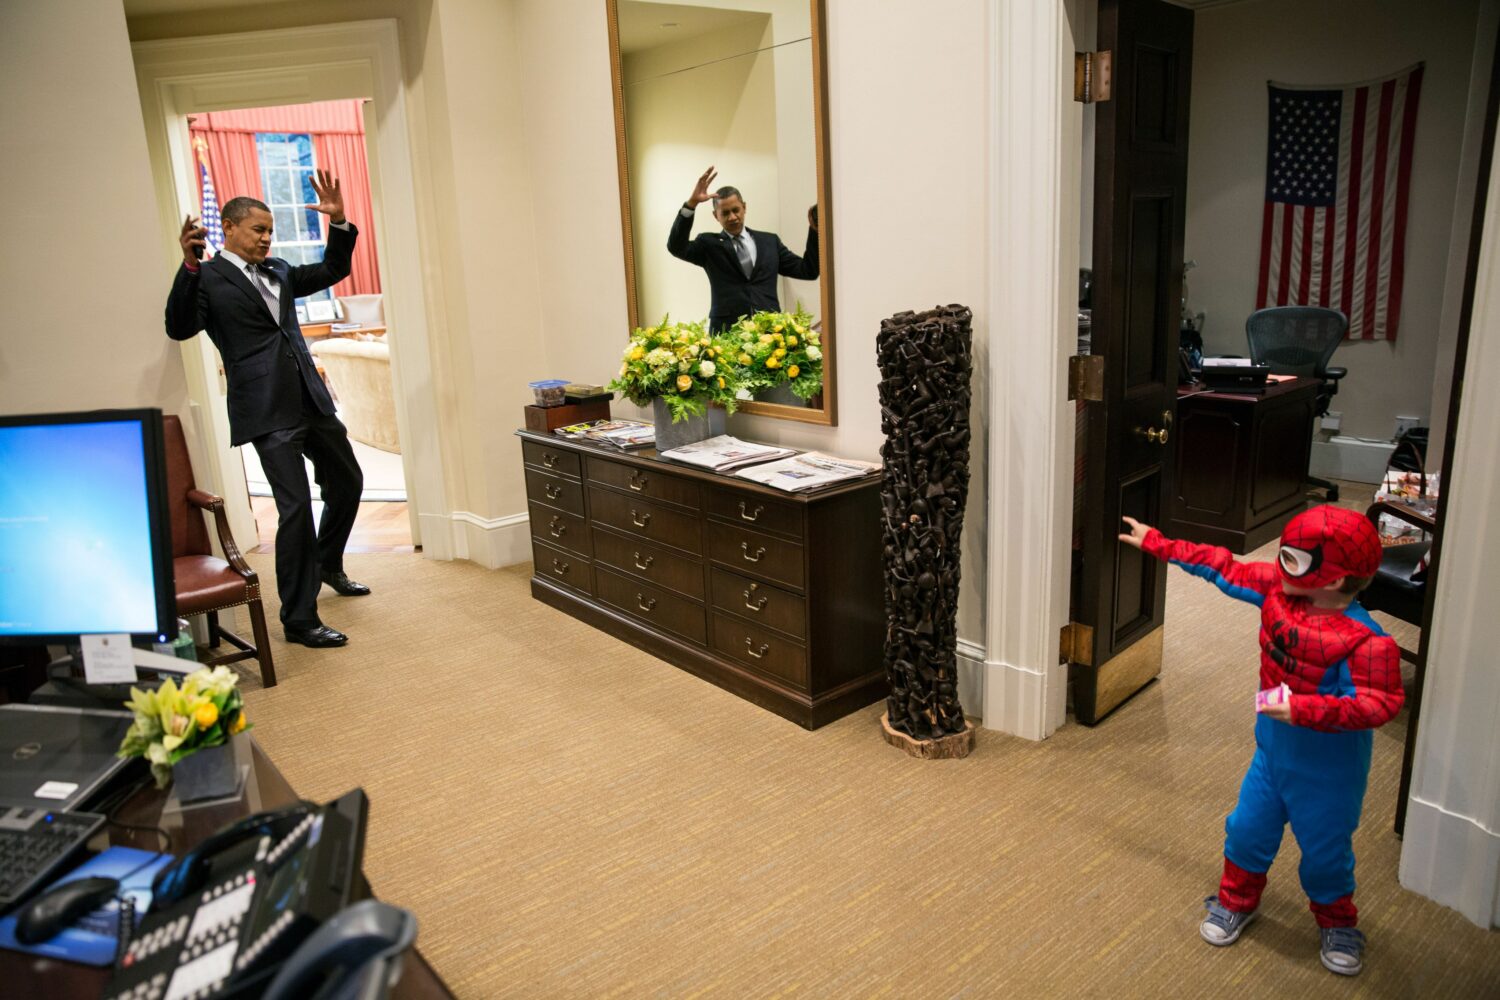 Pete Souza: Barack Obama pretends to be caught in Spider-Man’s web outside the Oval Office on Halloween